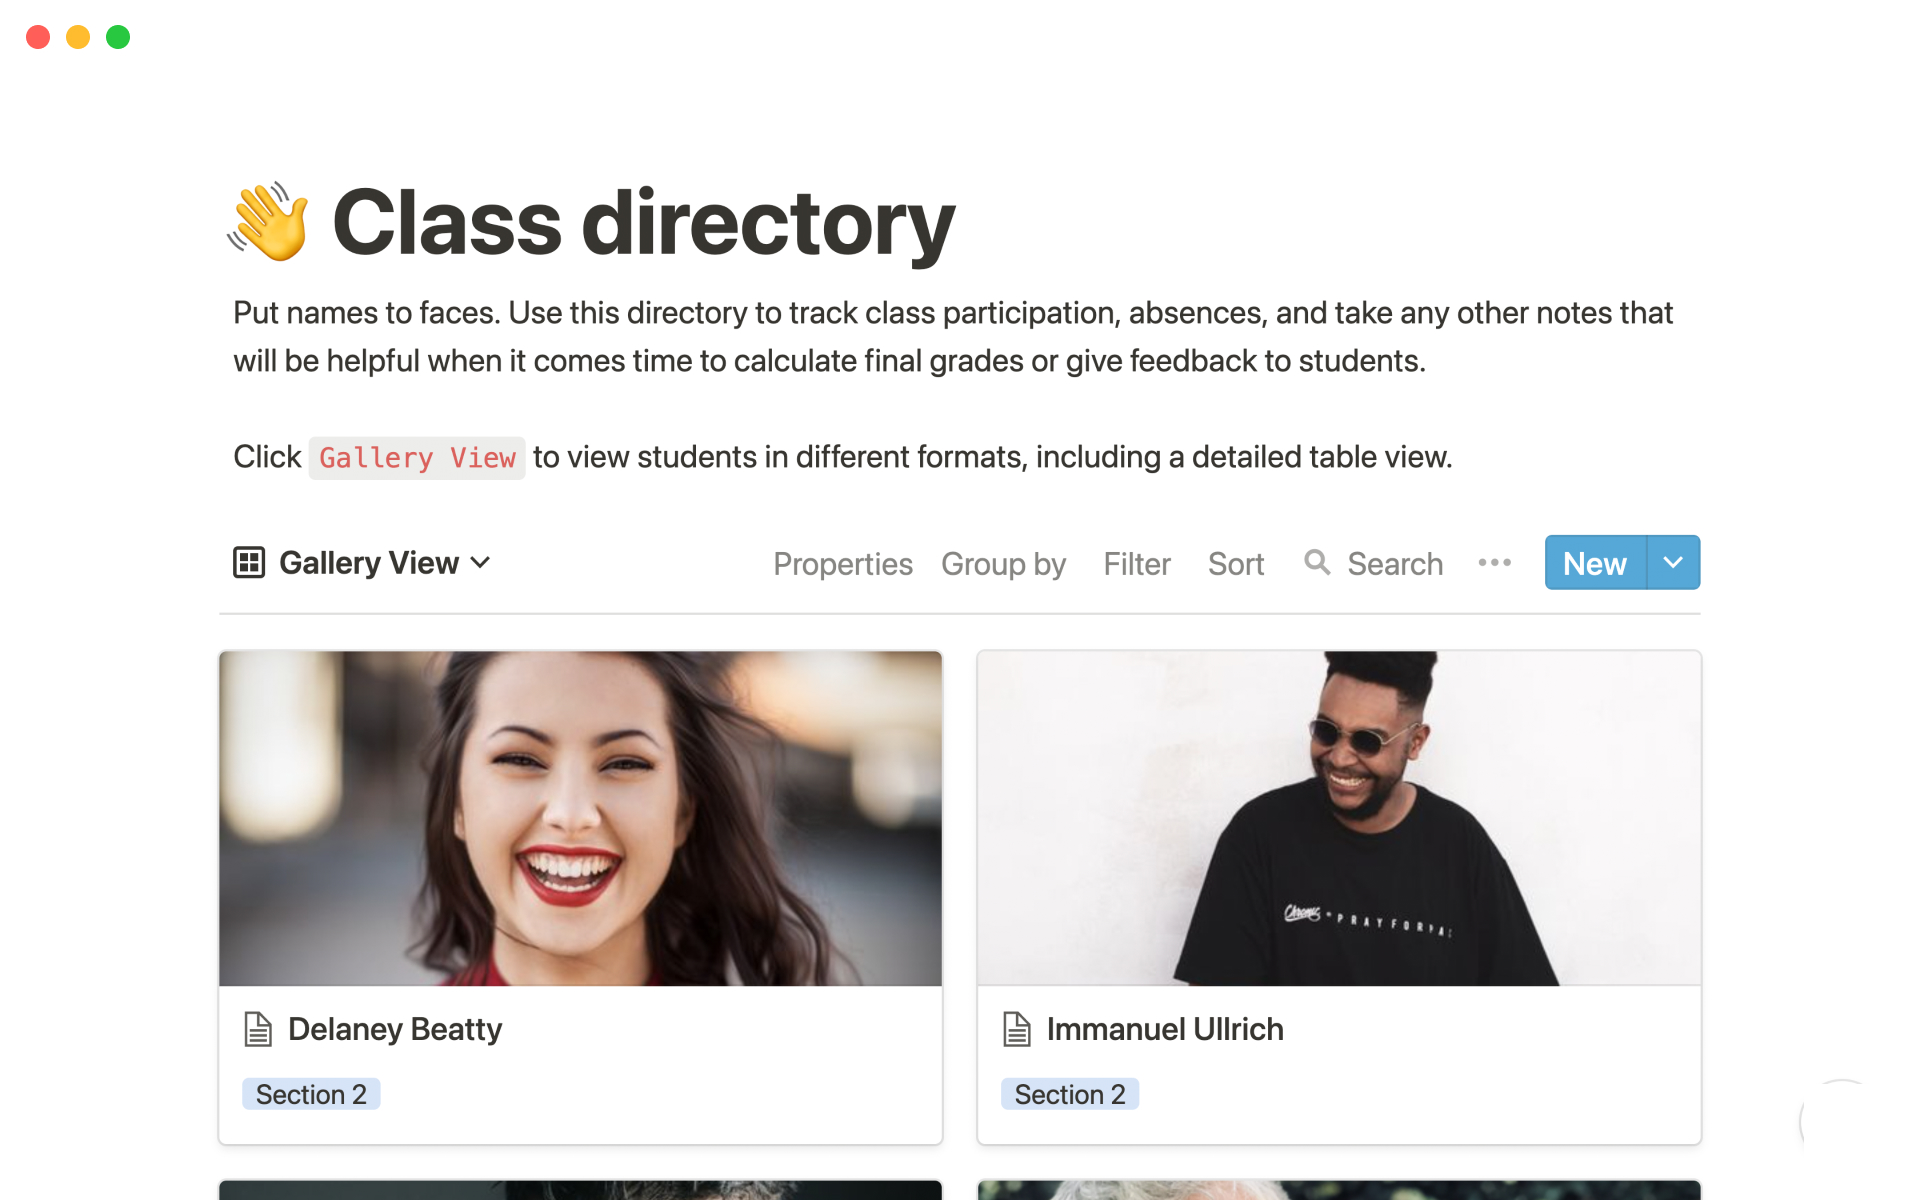 The desktop image for the Class directory template